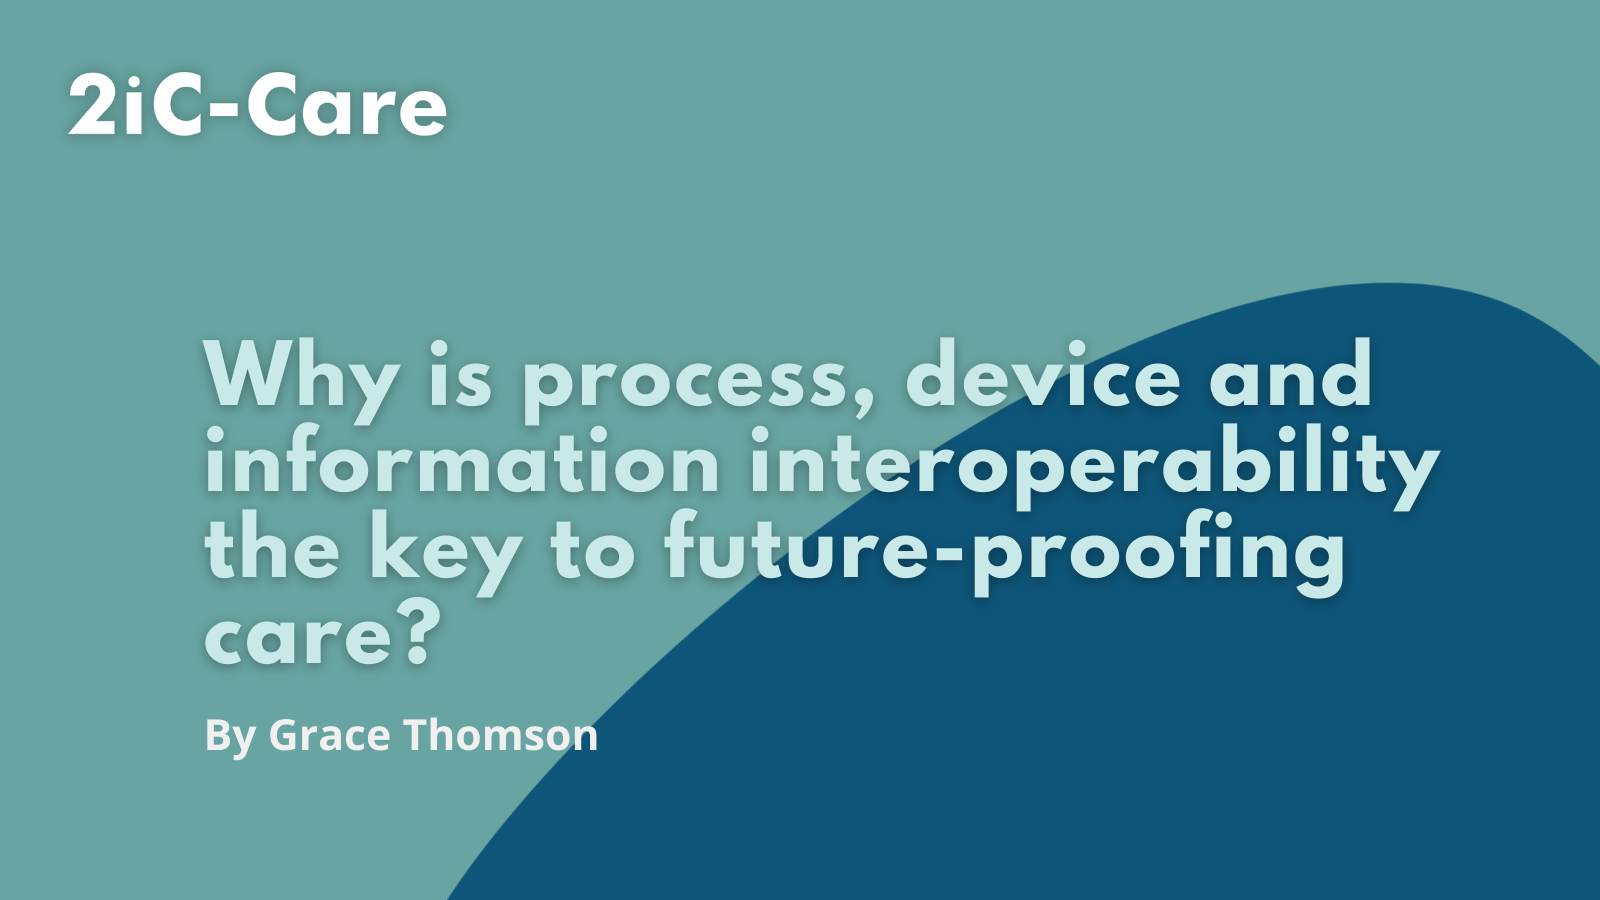 Why are 3 types of interoperability future-proofing care?